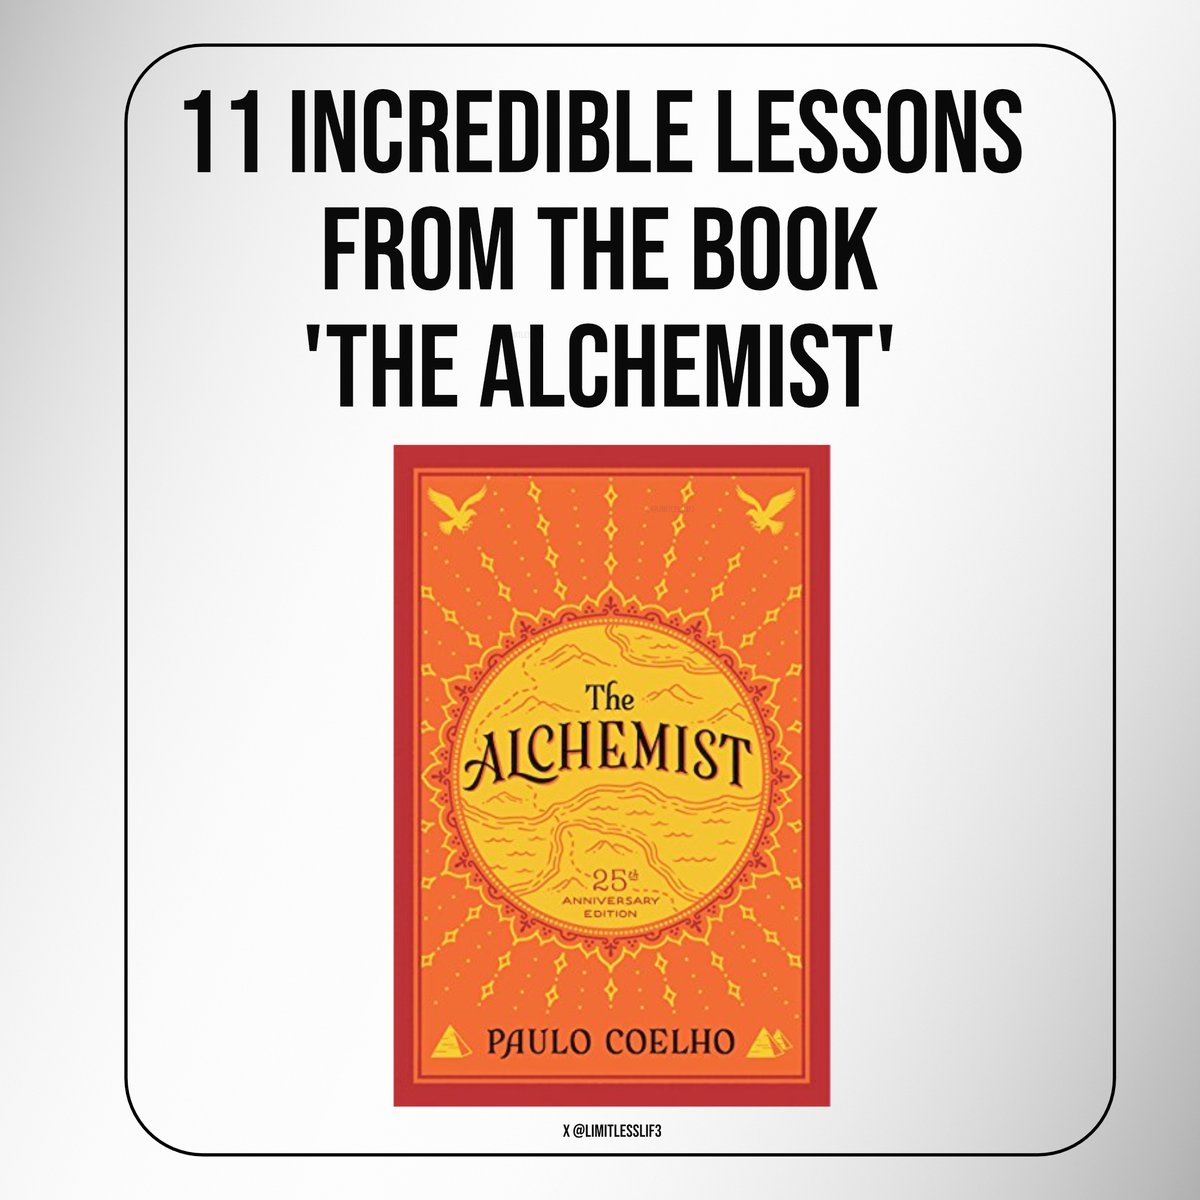 11 Incredible Lessons from the Book the Alchemist.